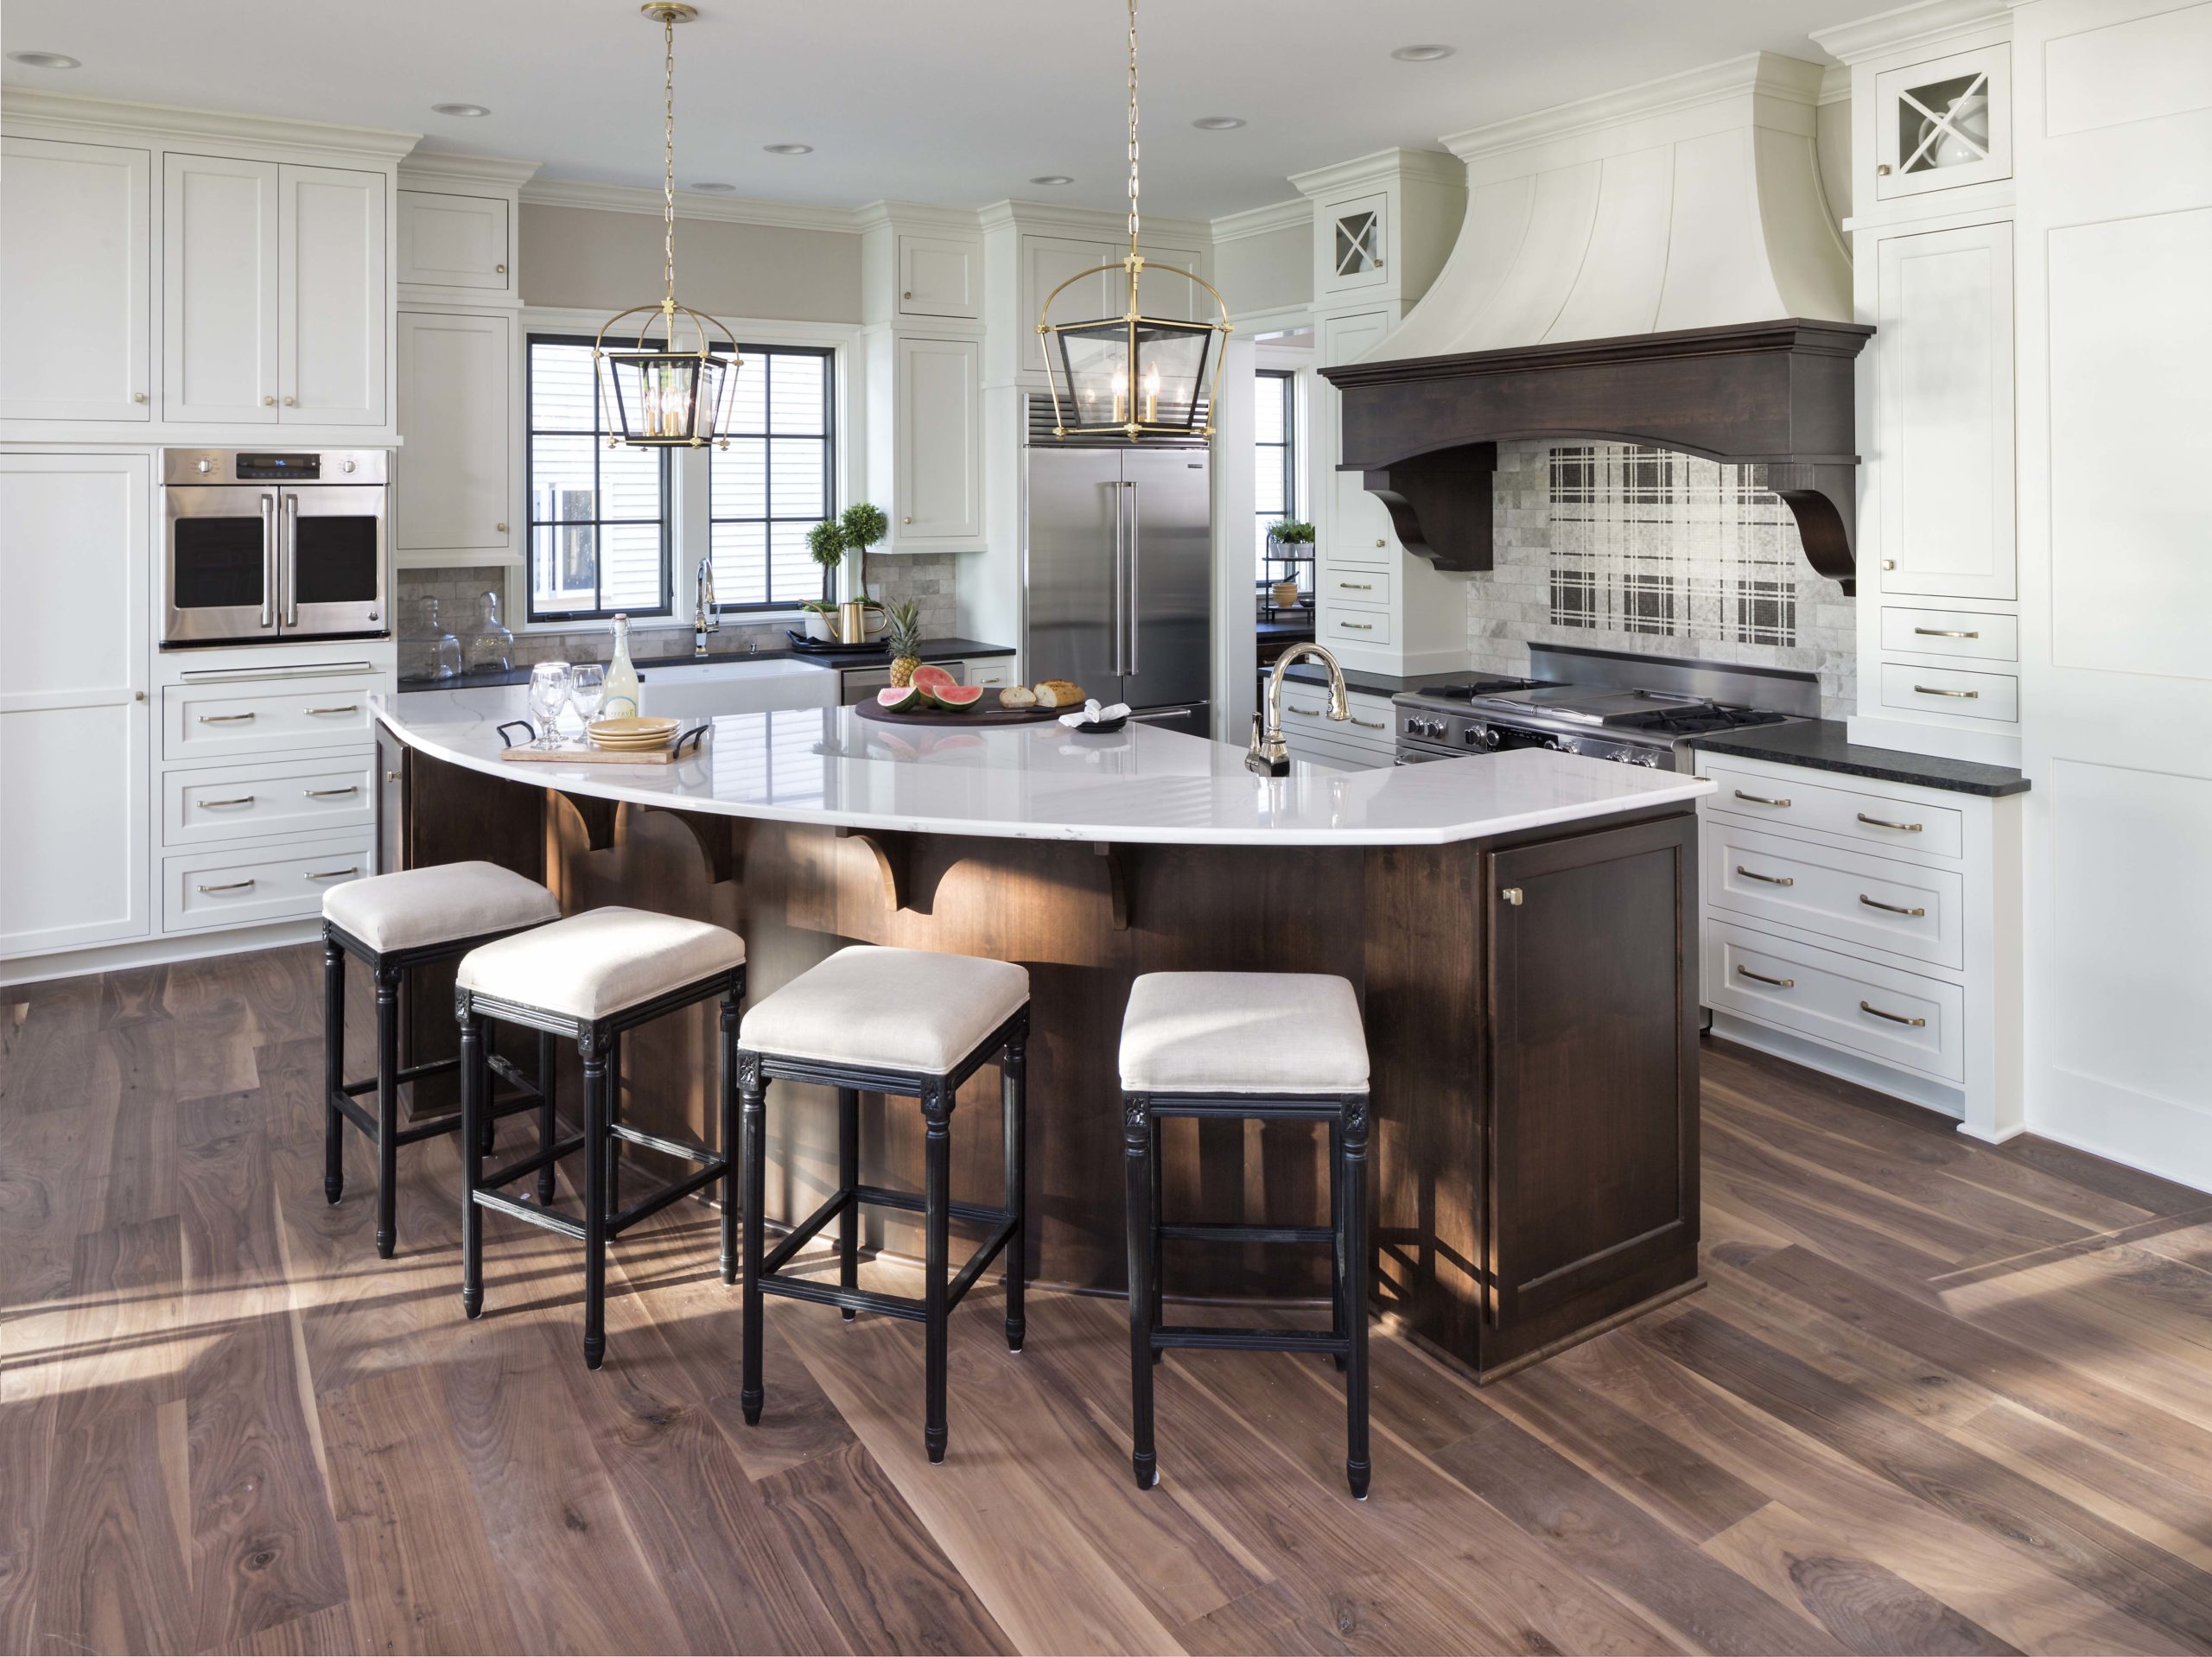 A spacious kitchen on Grimes Avenue with a center island and bar stools.